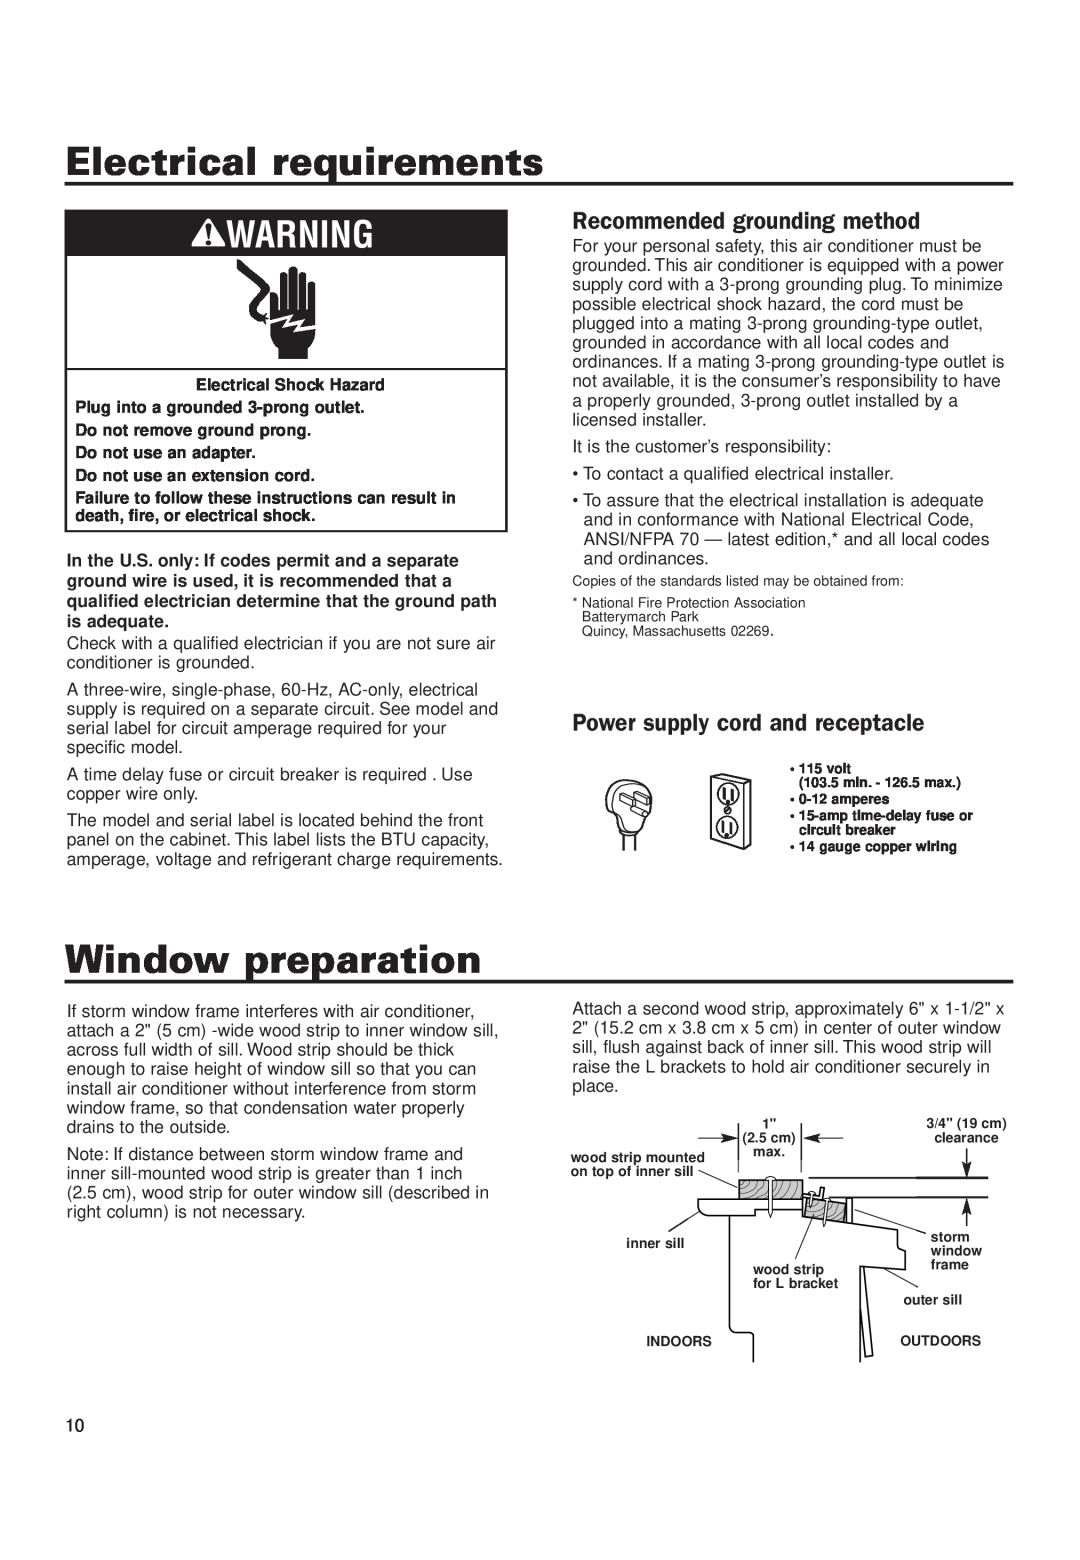 Whirlpool ACD052PK0 installation instructions Electrical requirements, Window preparation, Recommended grounding method 